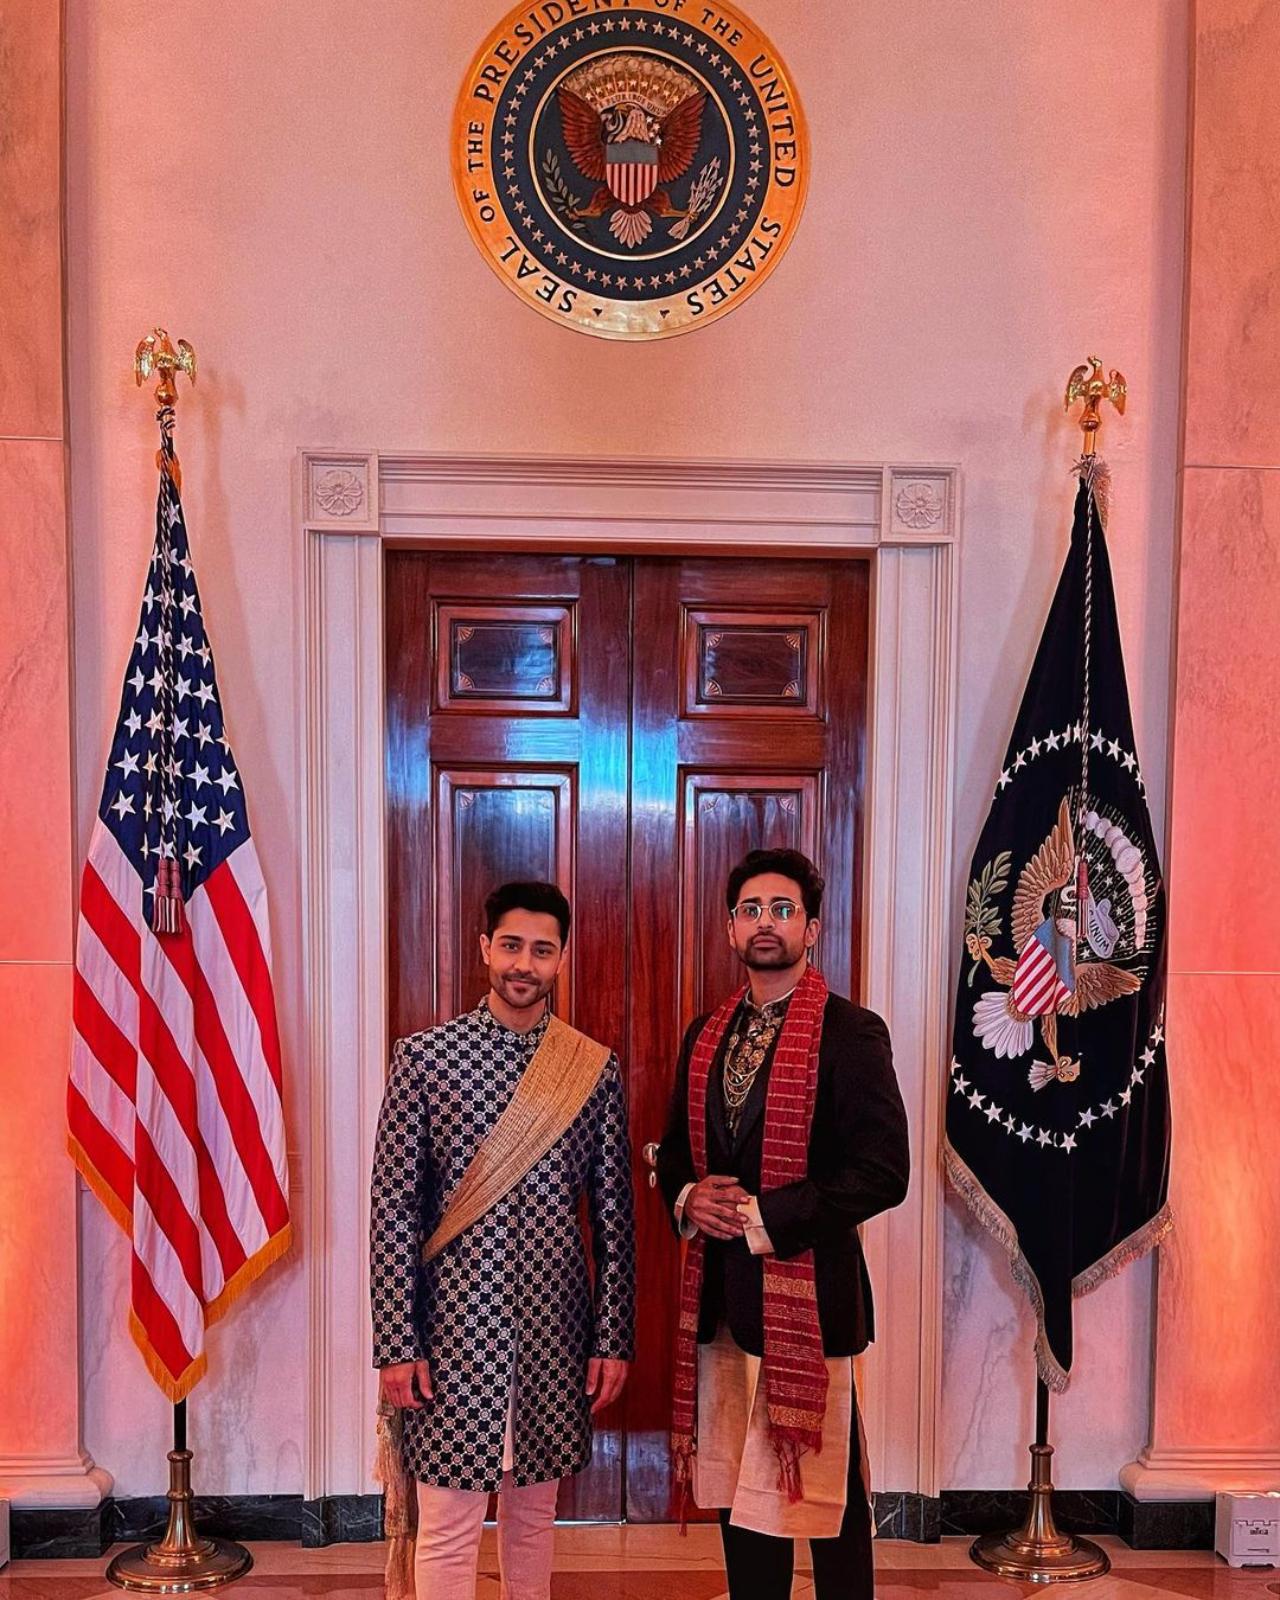 The Life Of Pi and How I Met Your Father actor Suraj Sharma was also part of the festivities in The White House. 